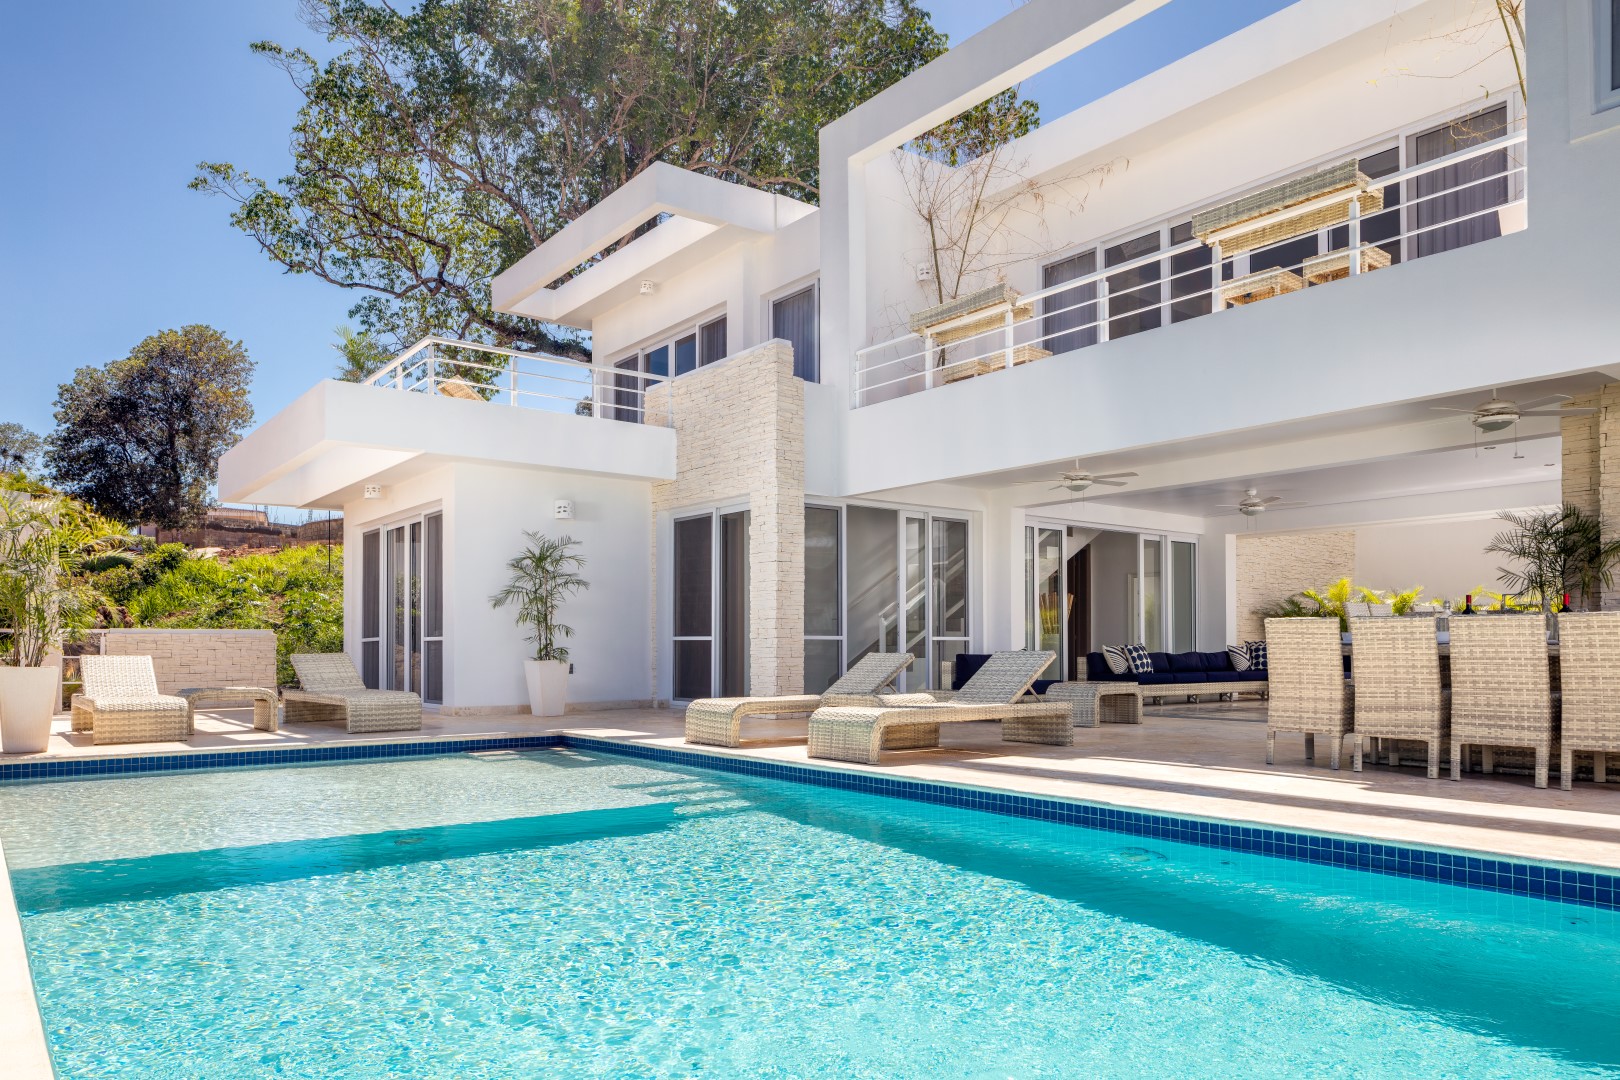 Things To Consider Before Buying Property In The Dominican Republic – Part 2